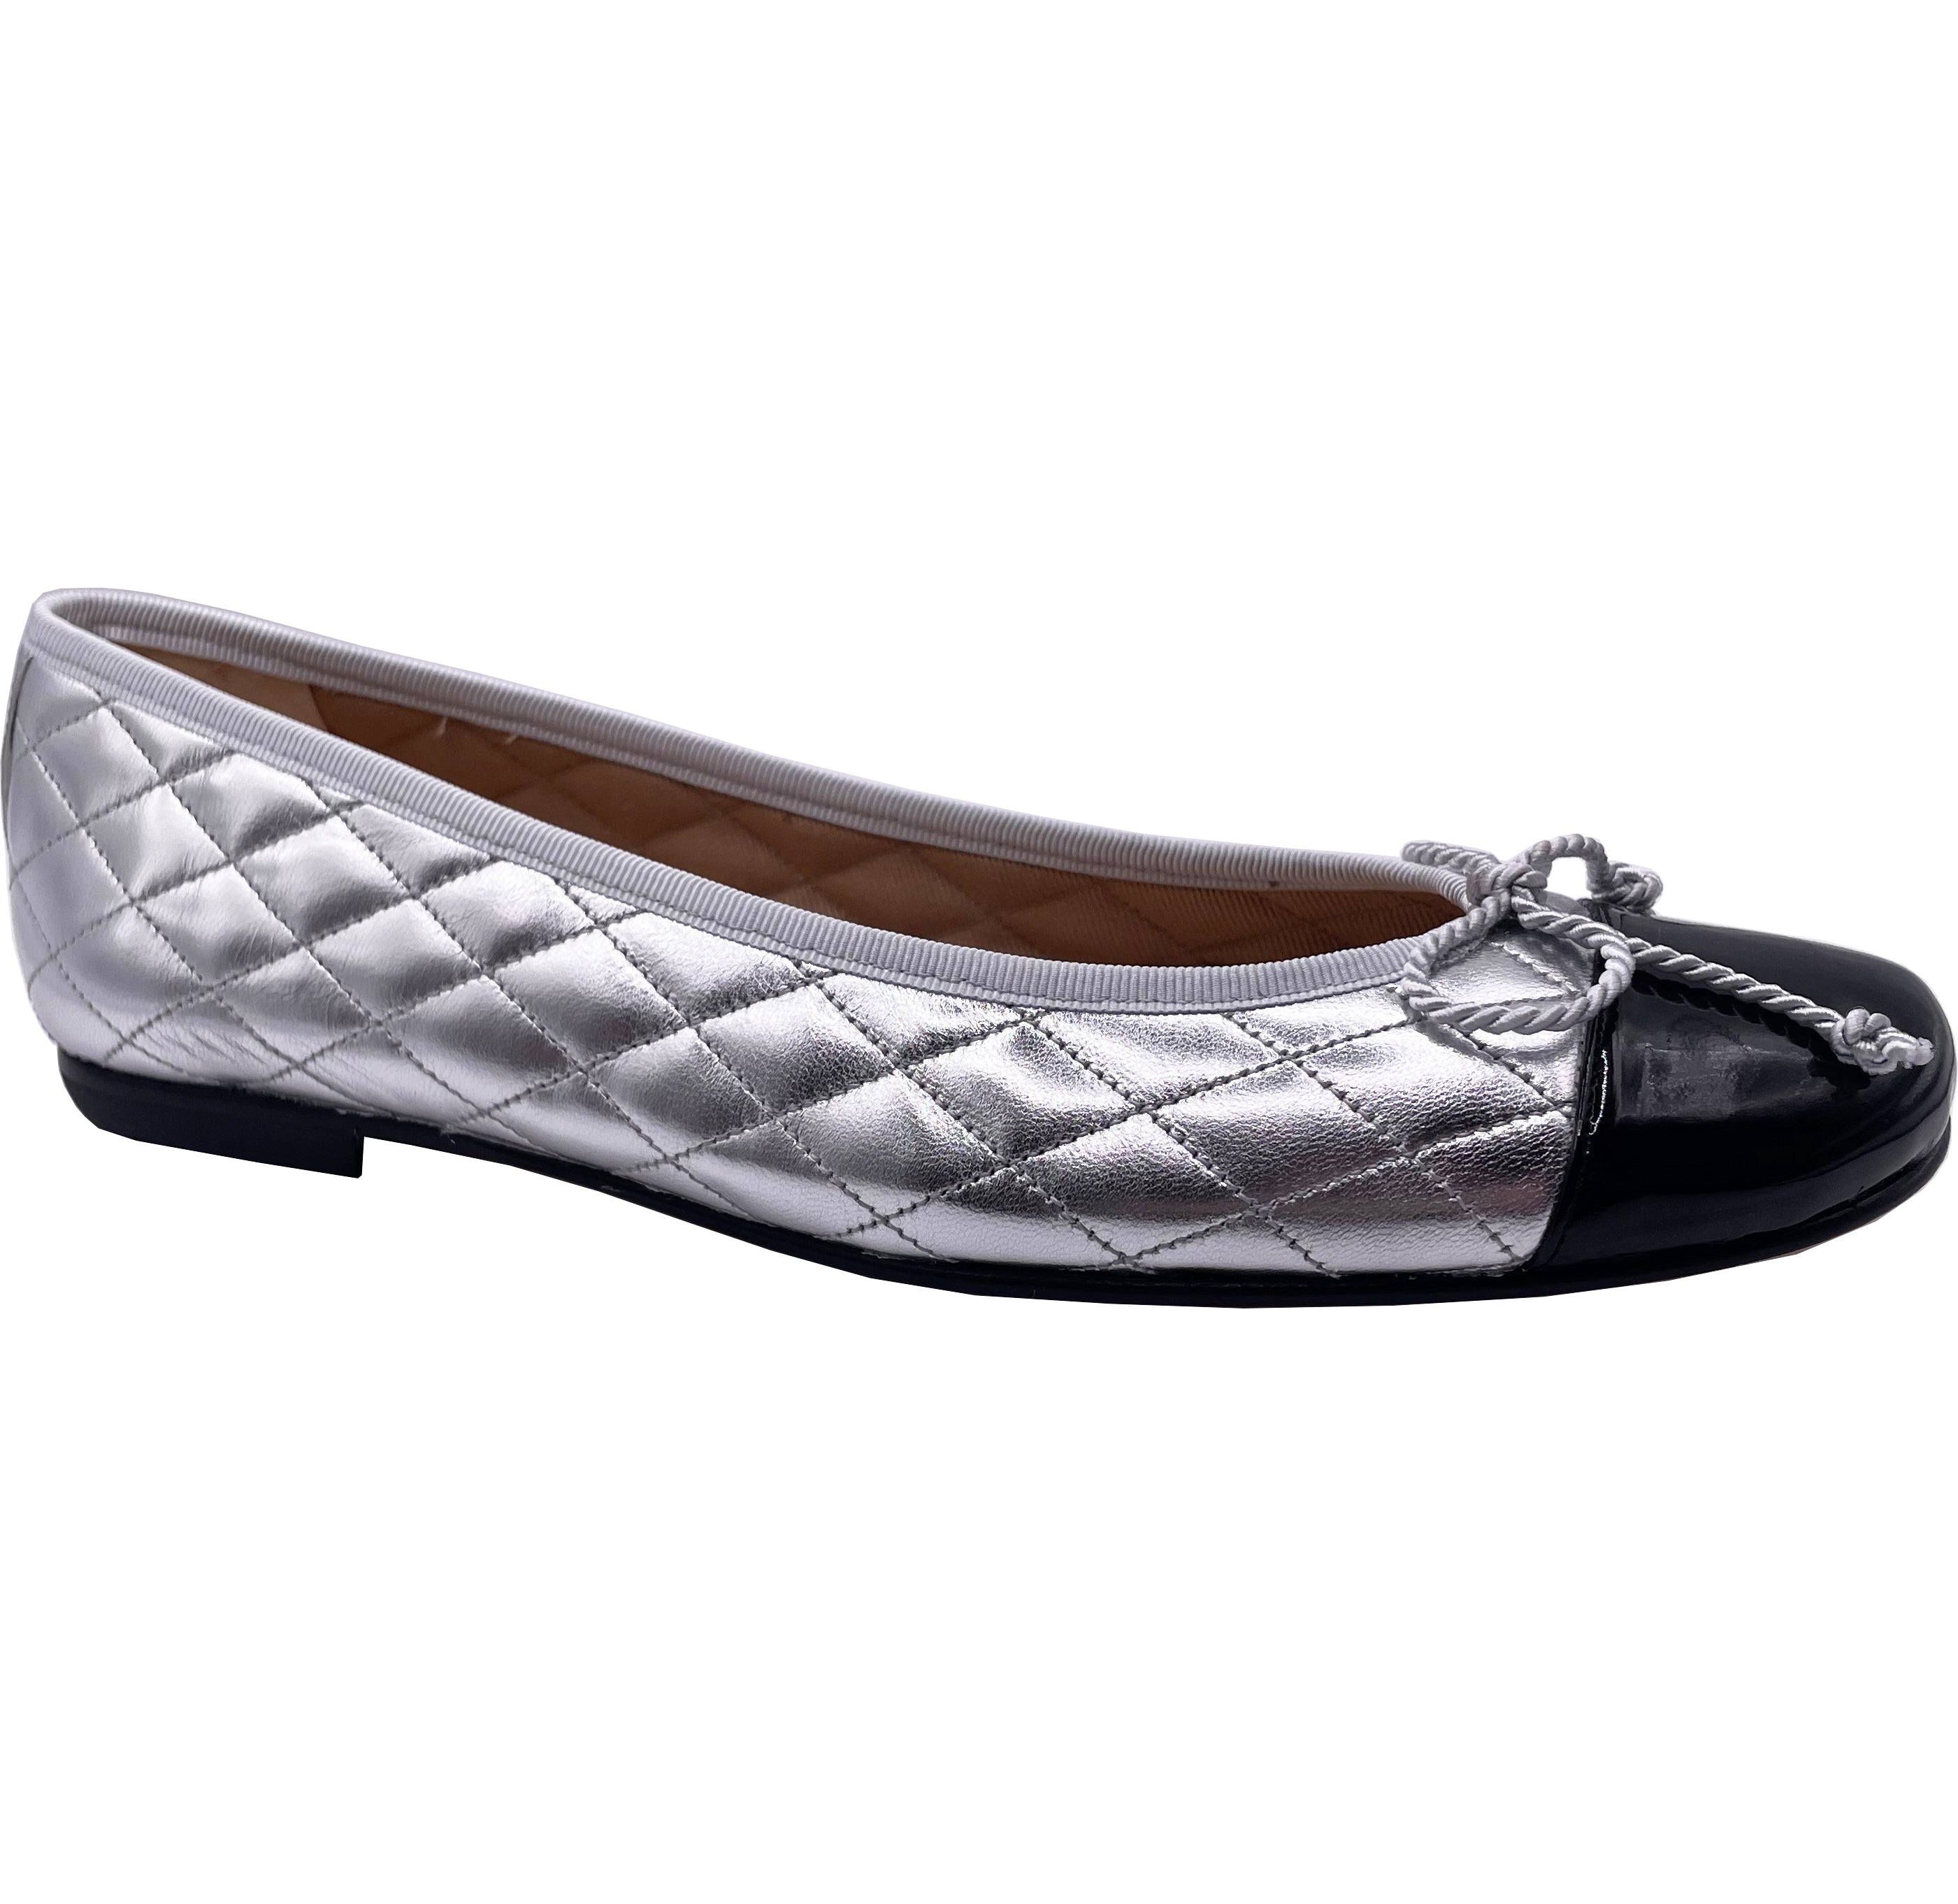 Passport Leather Sole - Silver Metallic and Black